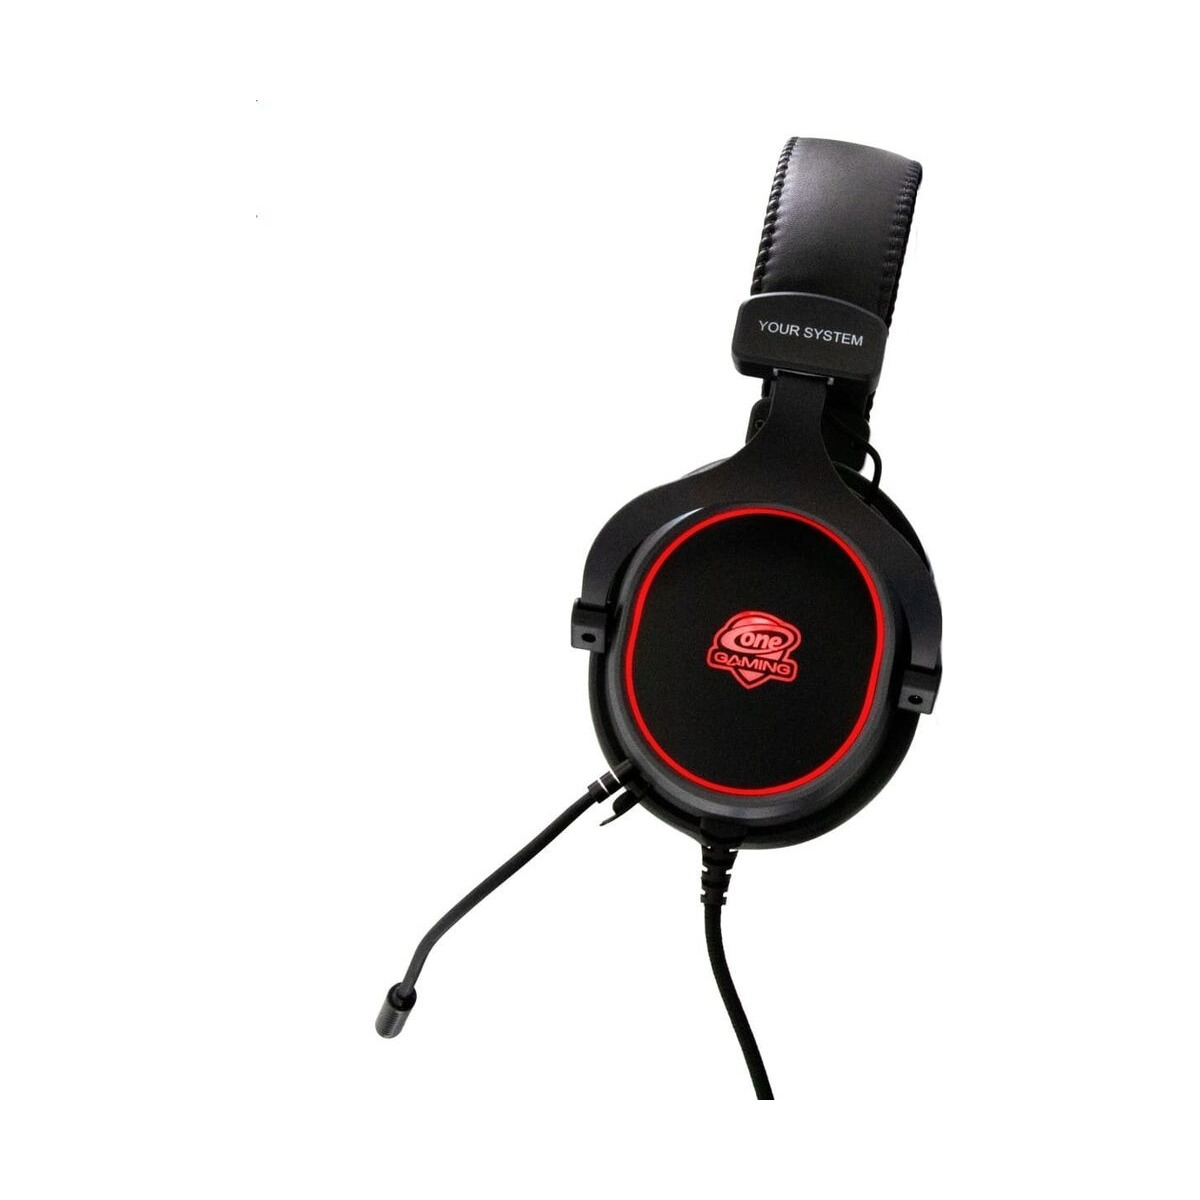 ONE GAMING Over-ear Schwarz EQUALIZE, Headset